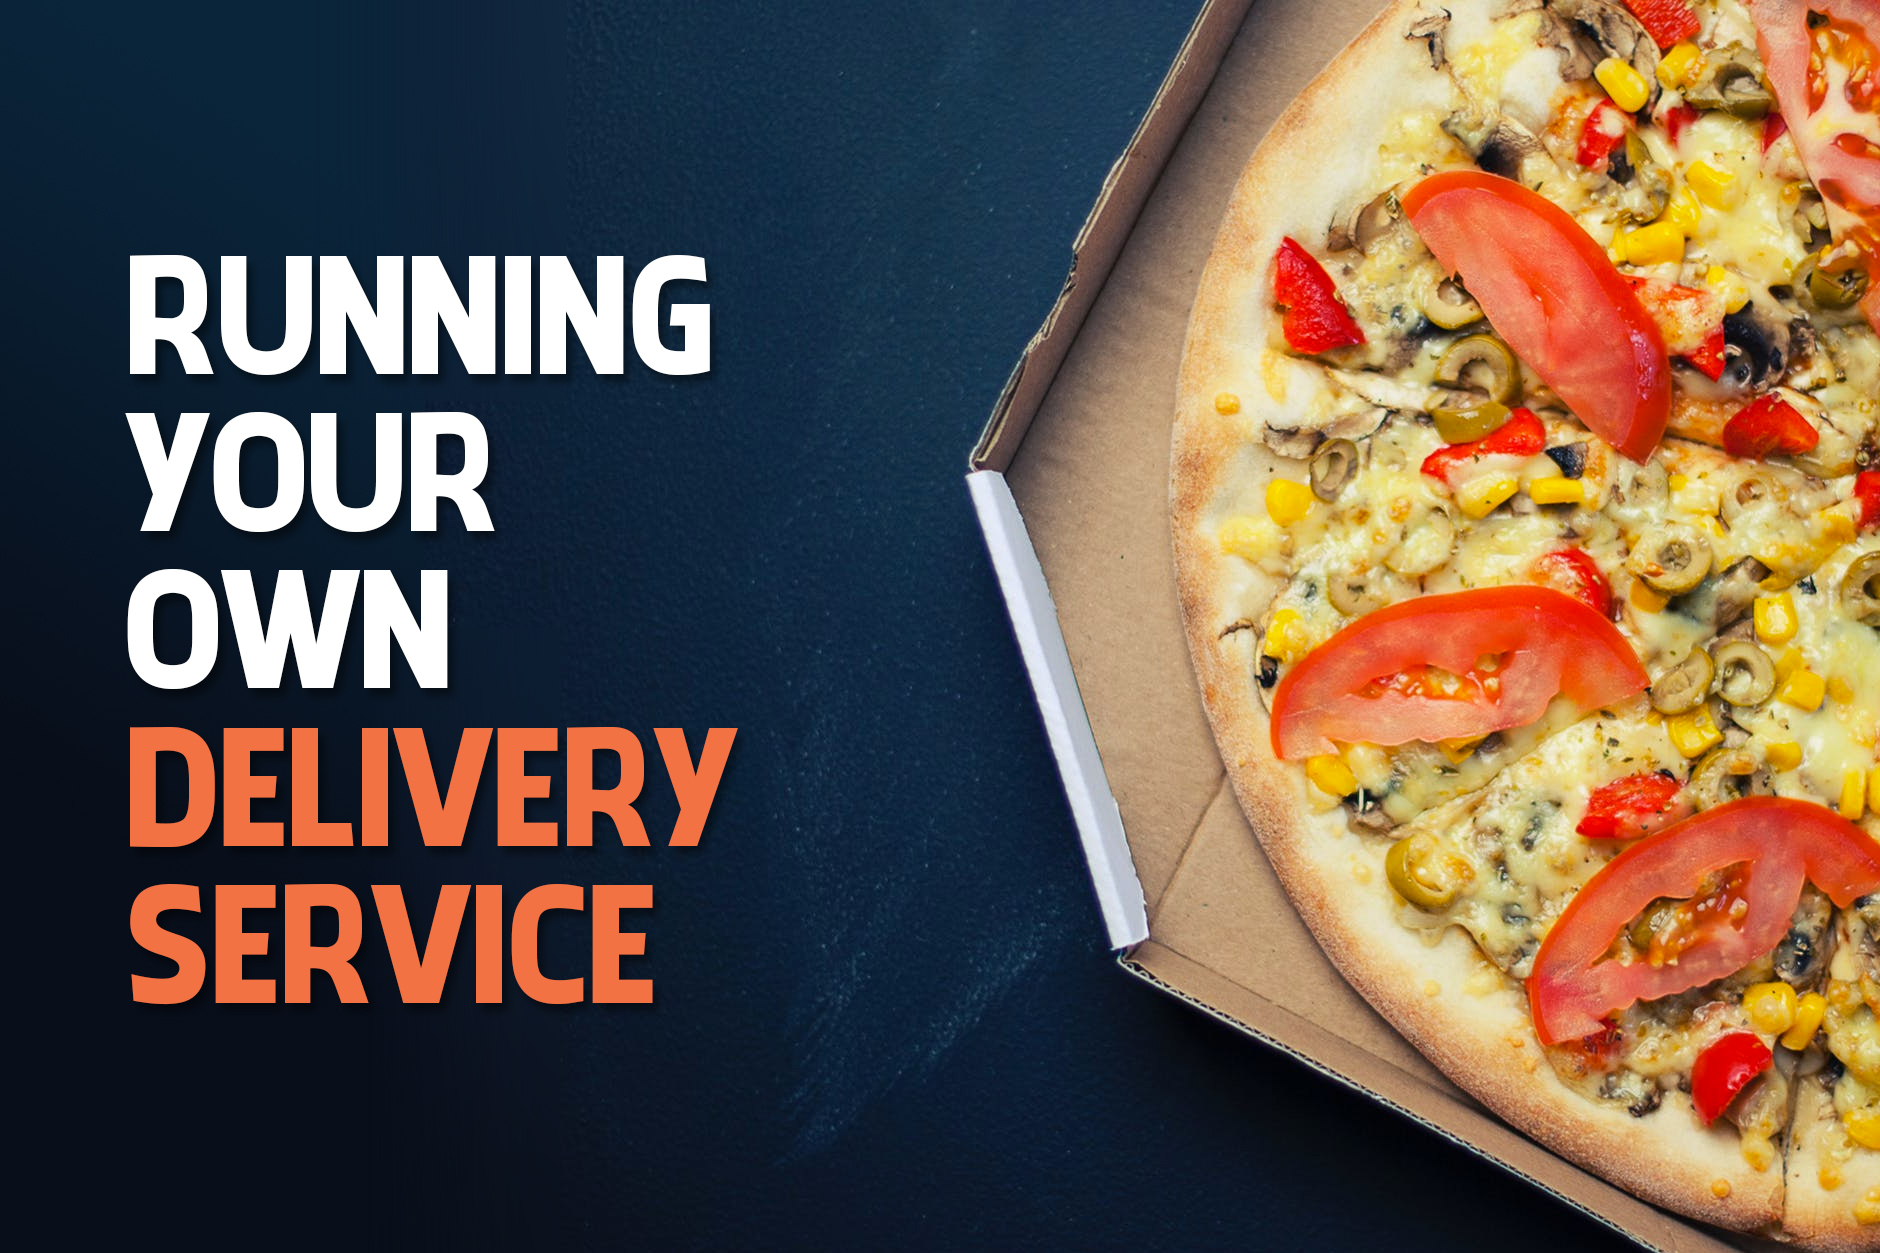 Restaurant Delivery: Running Your Own Delivery Service